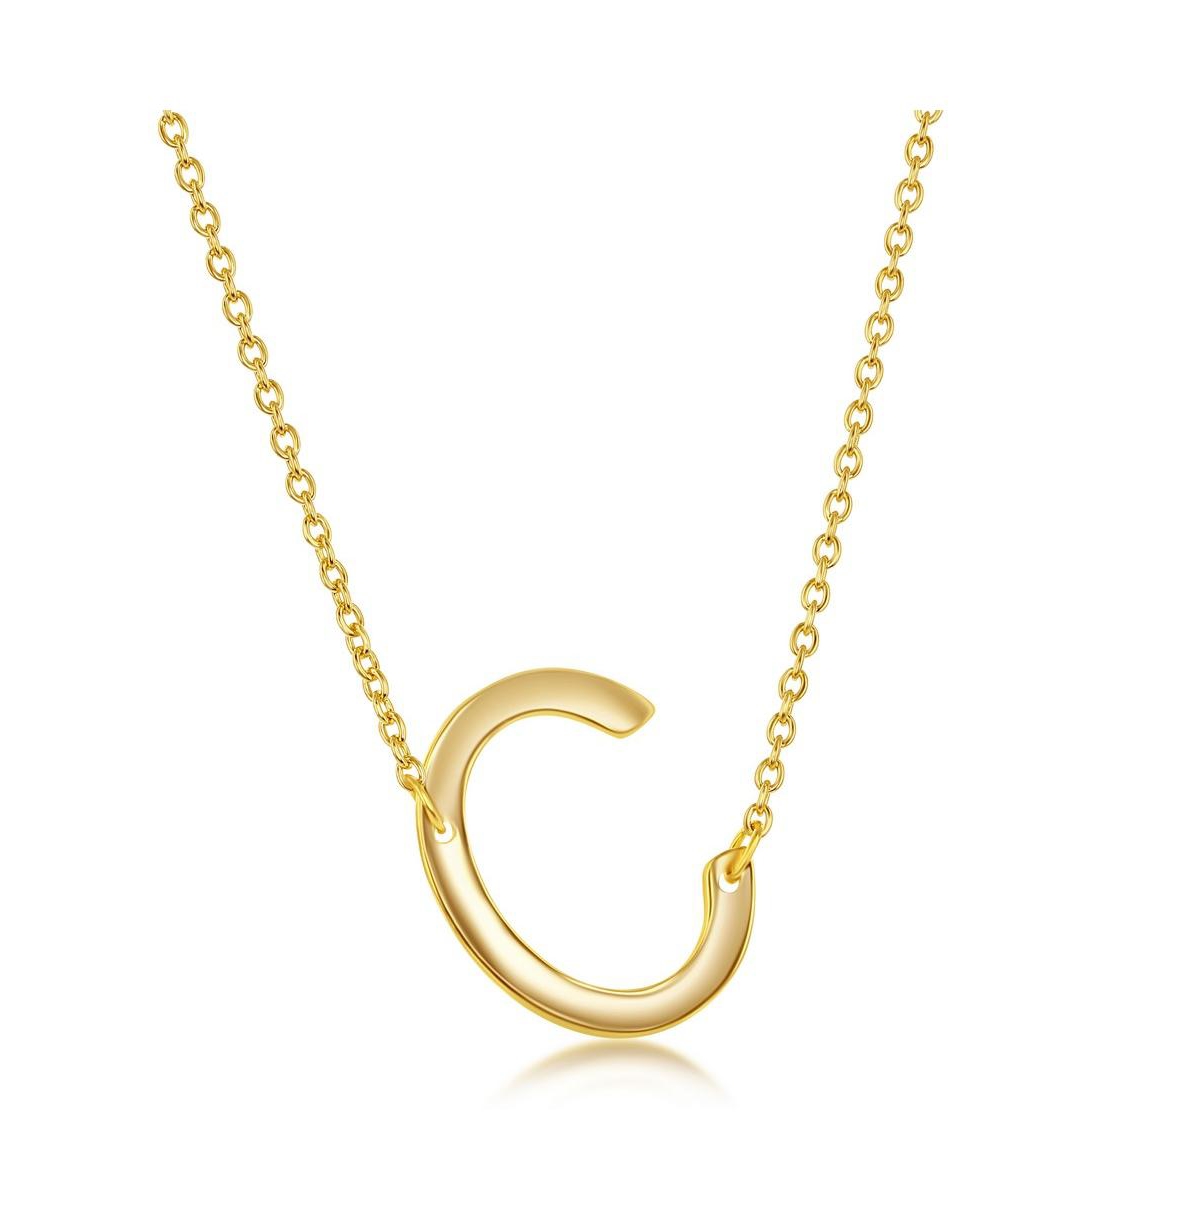 Gold Tone Sideways Initial Necklace - Gold c